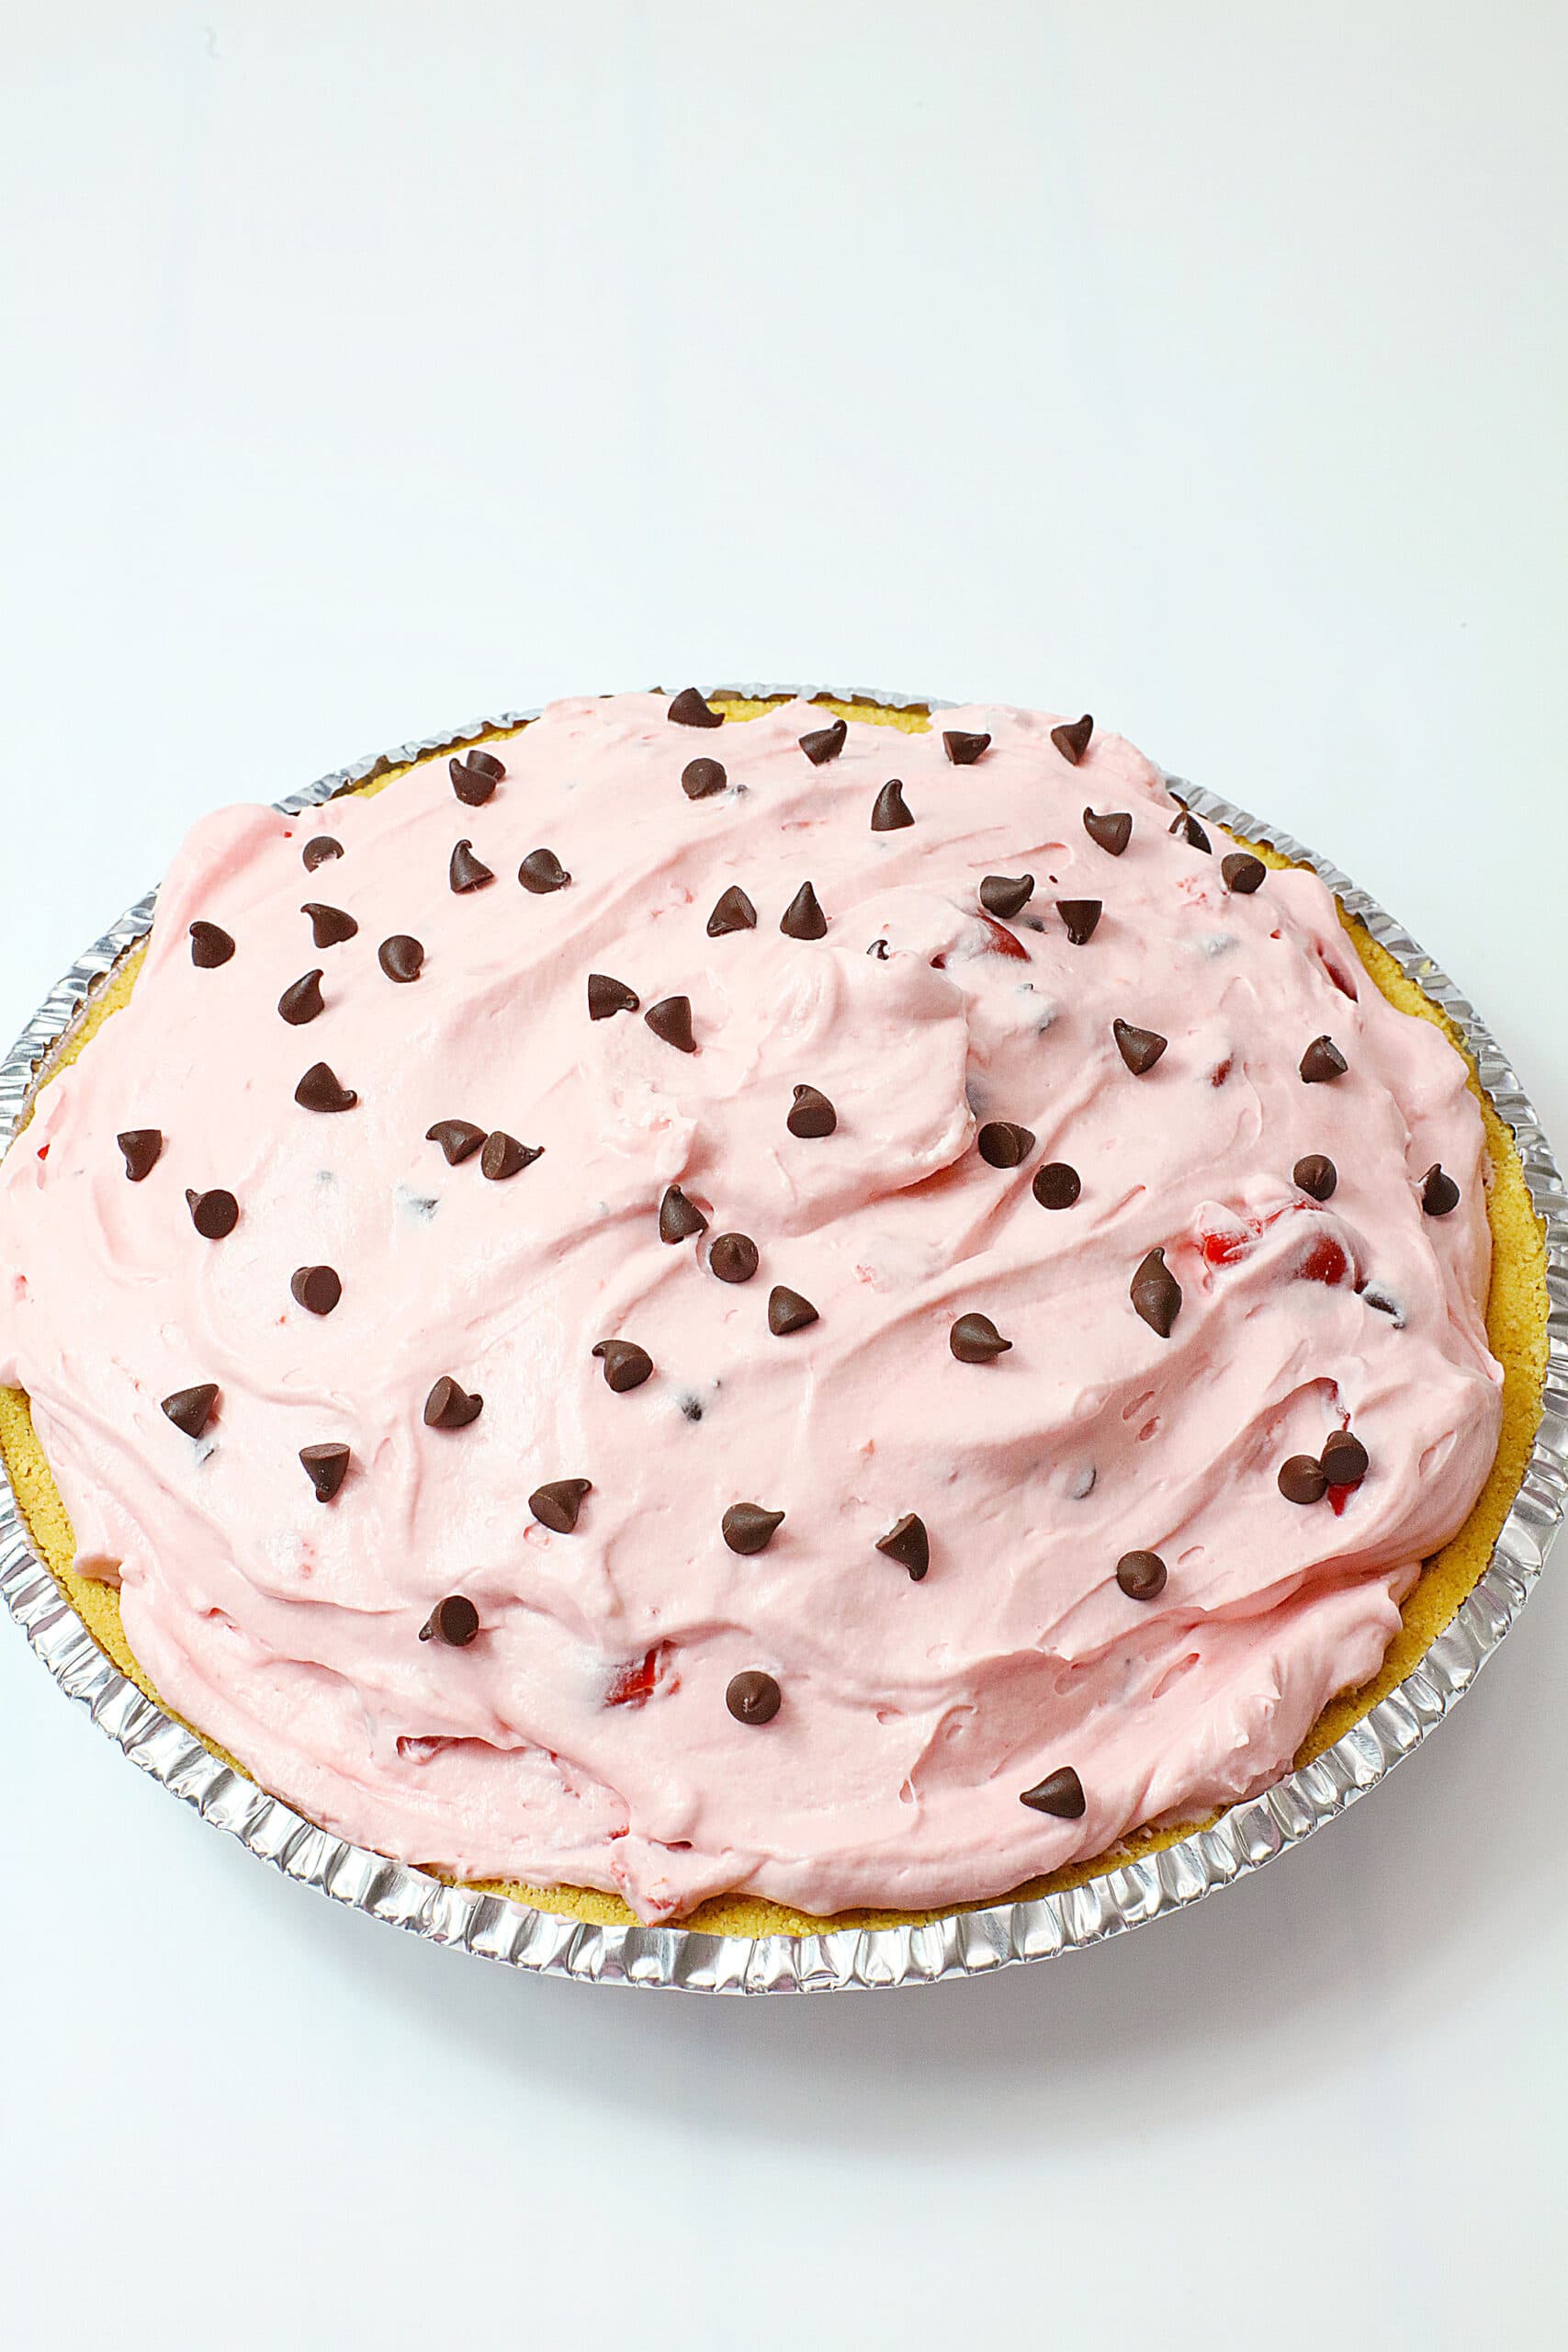 sprinkle chocolate chips on top